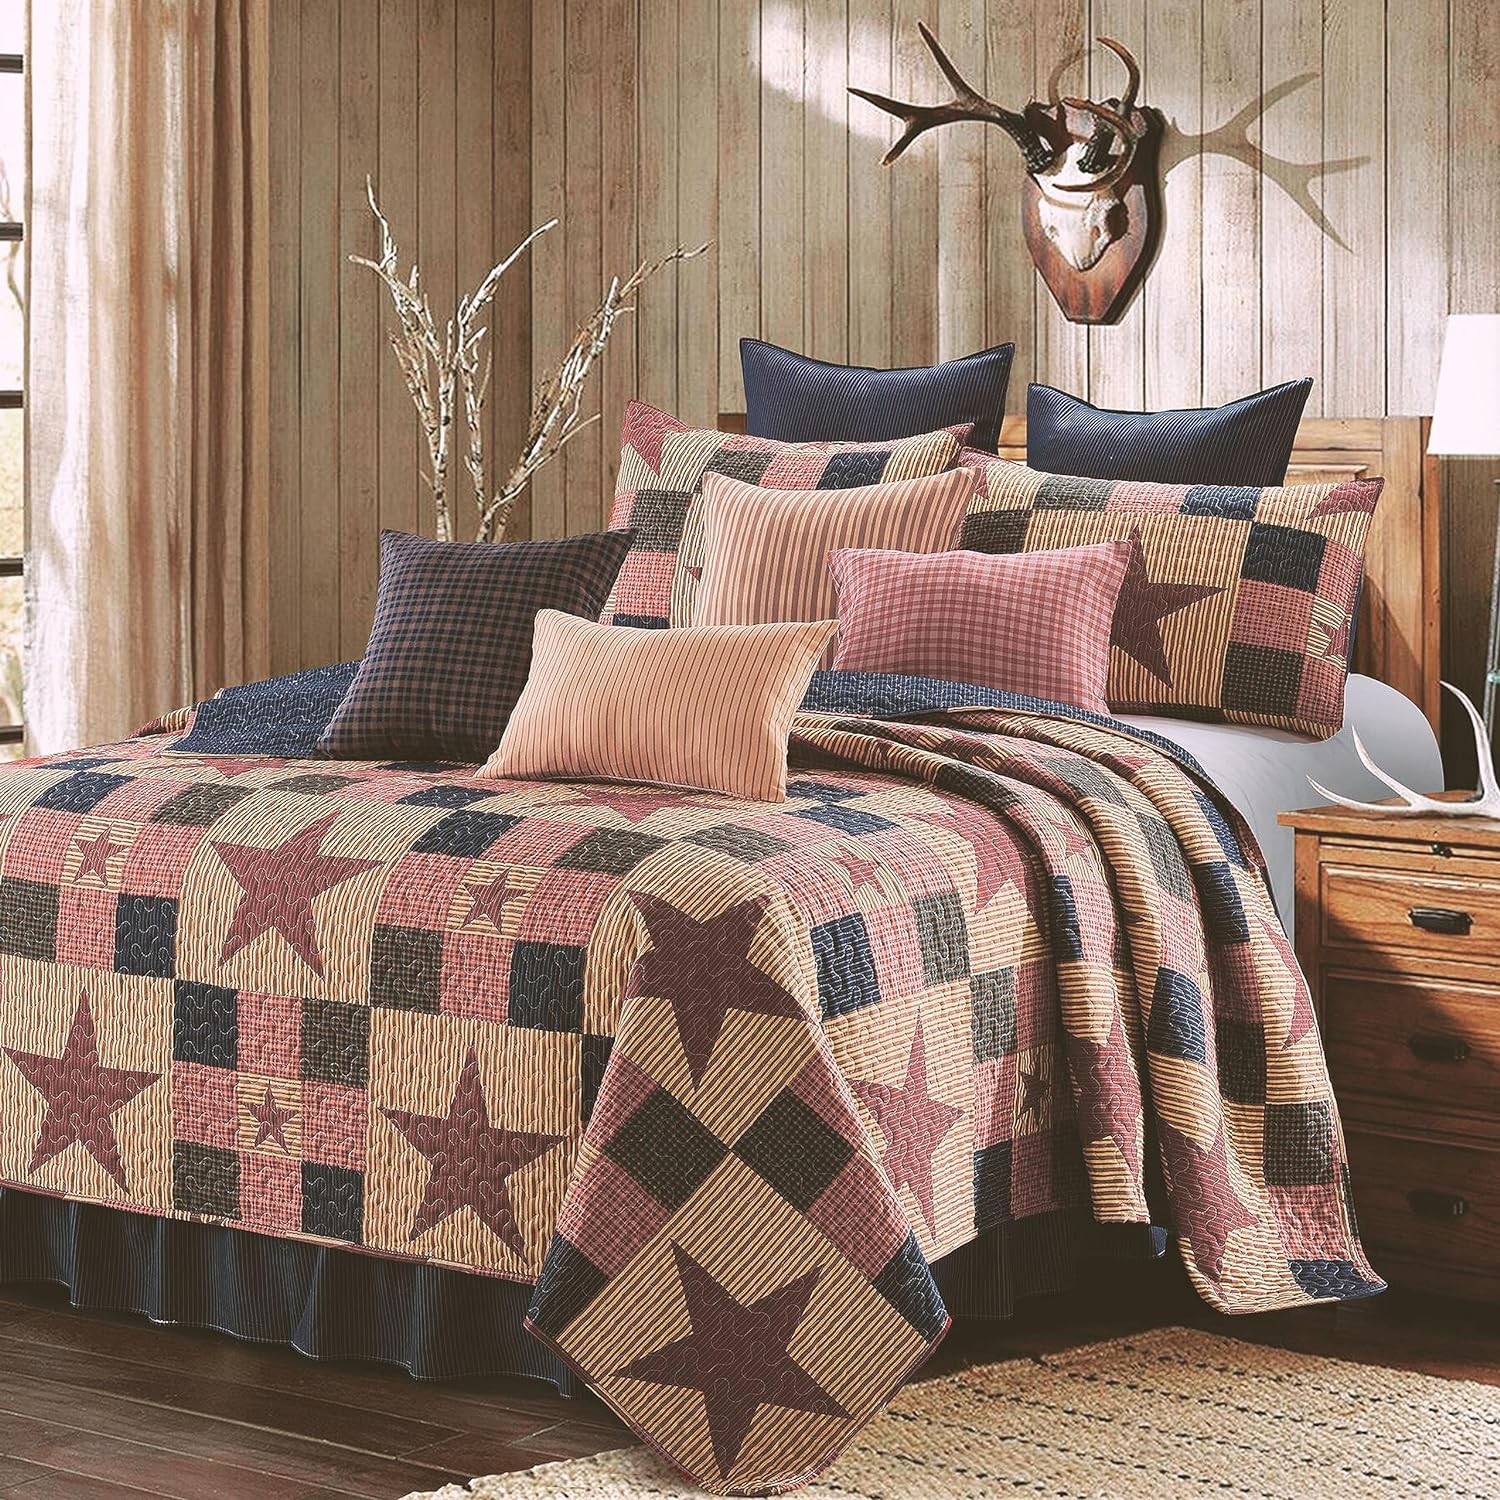 Virah Bella 3 Piece King Cabin Quilt Bedding Set - Mountain Cabin Red - Rustic Country Reversible Patchwork Comforter Set with Decorative Pillow Shams, Red/Tan